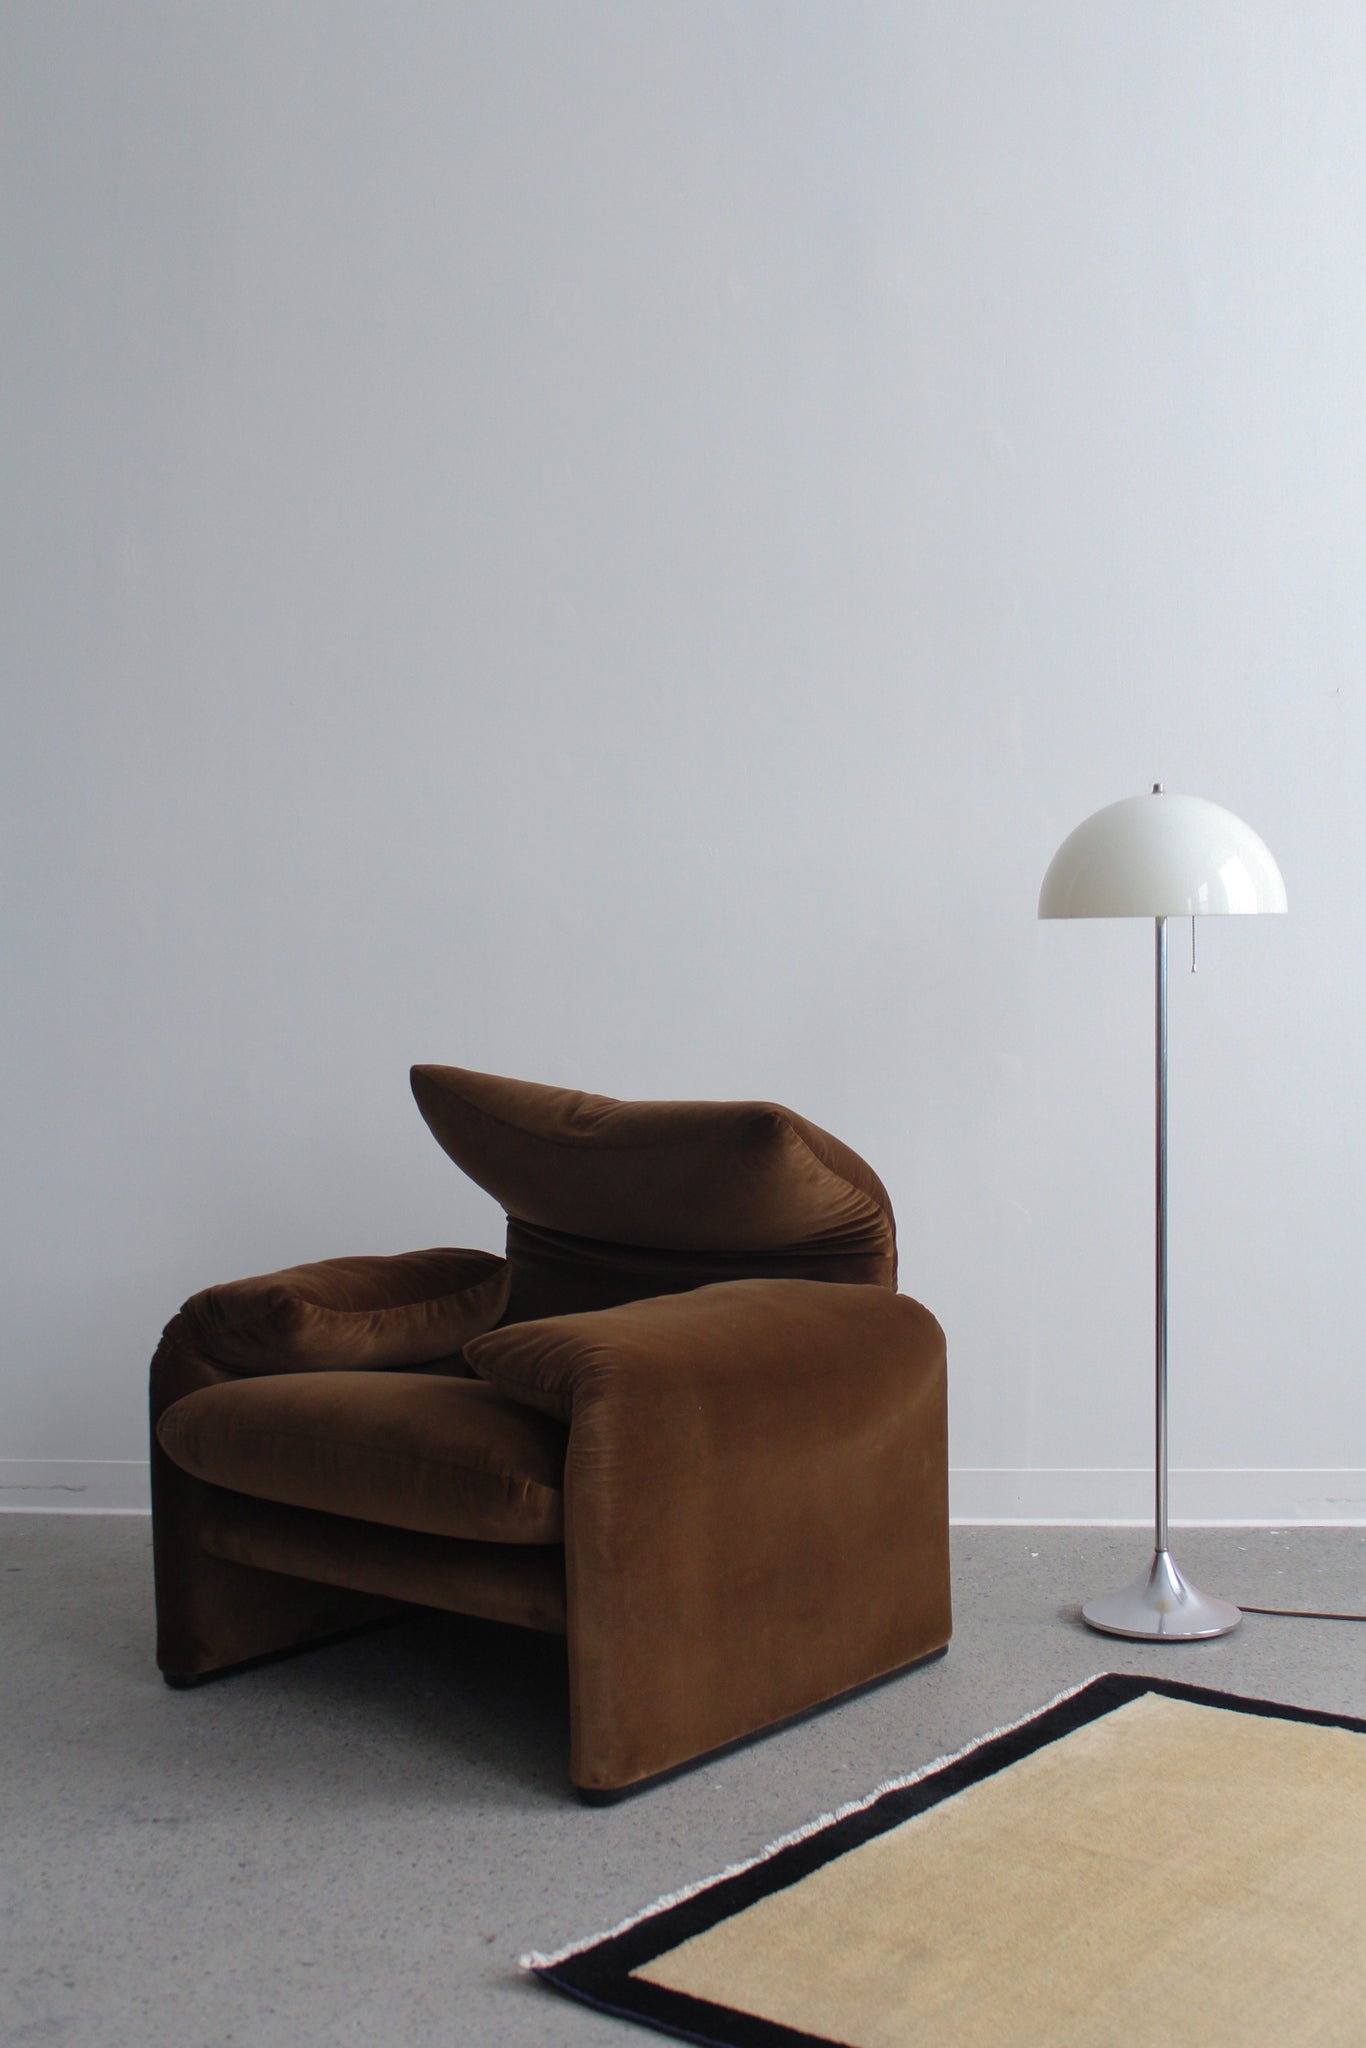 Maralunga Lounge Chair by Vico Magistretti for Cassina